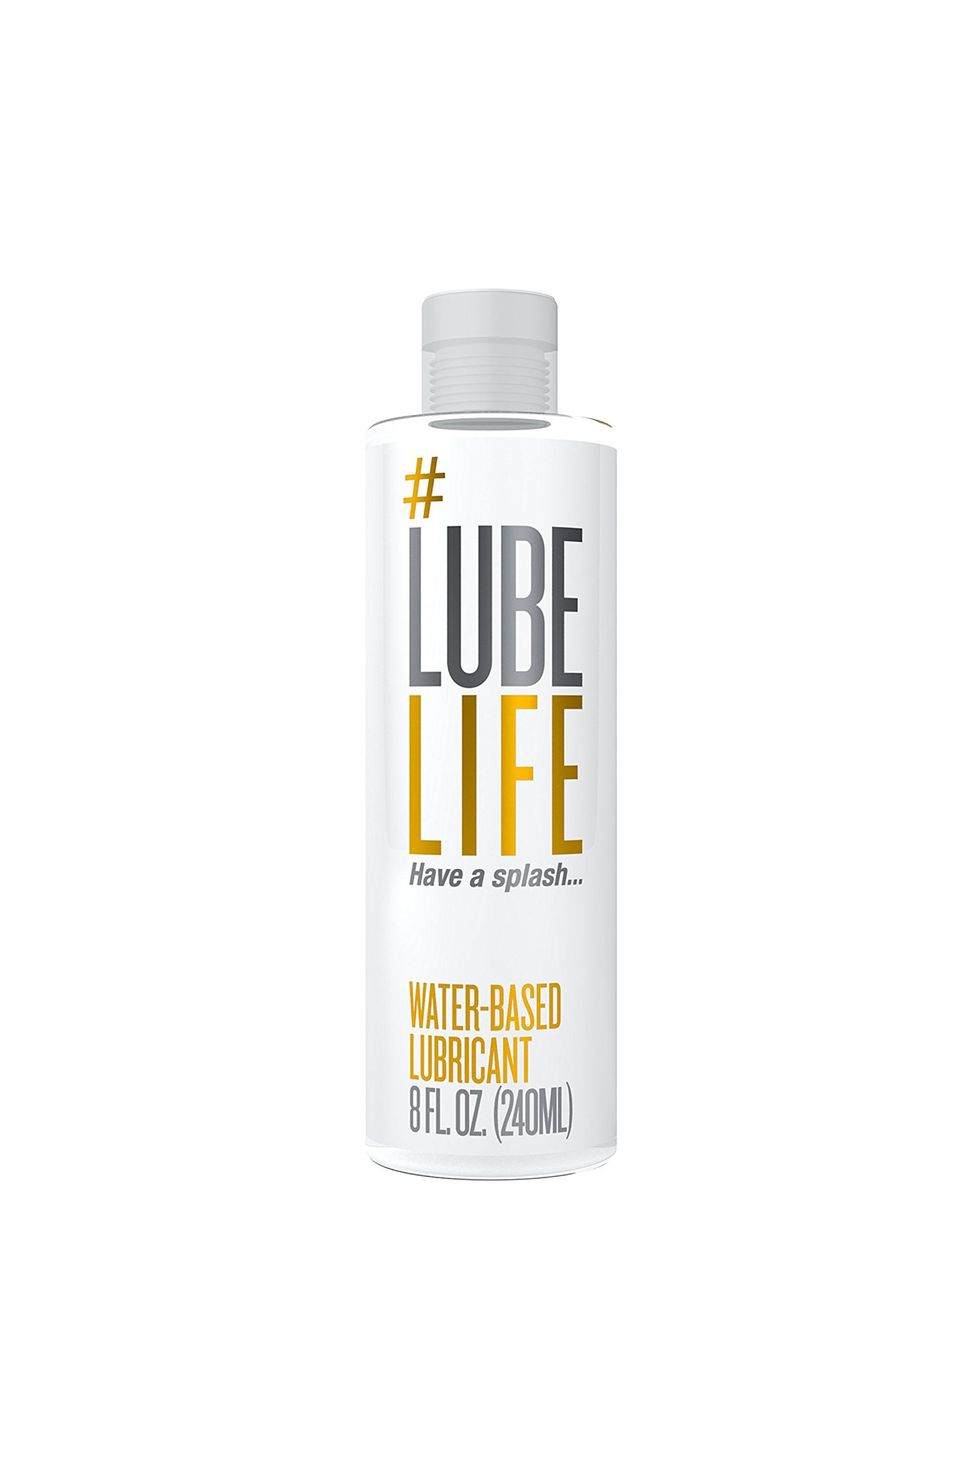 For when you never want to experience friction again. #lube